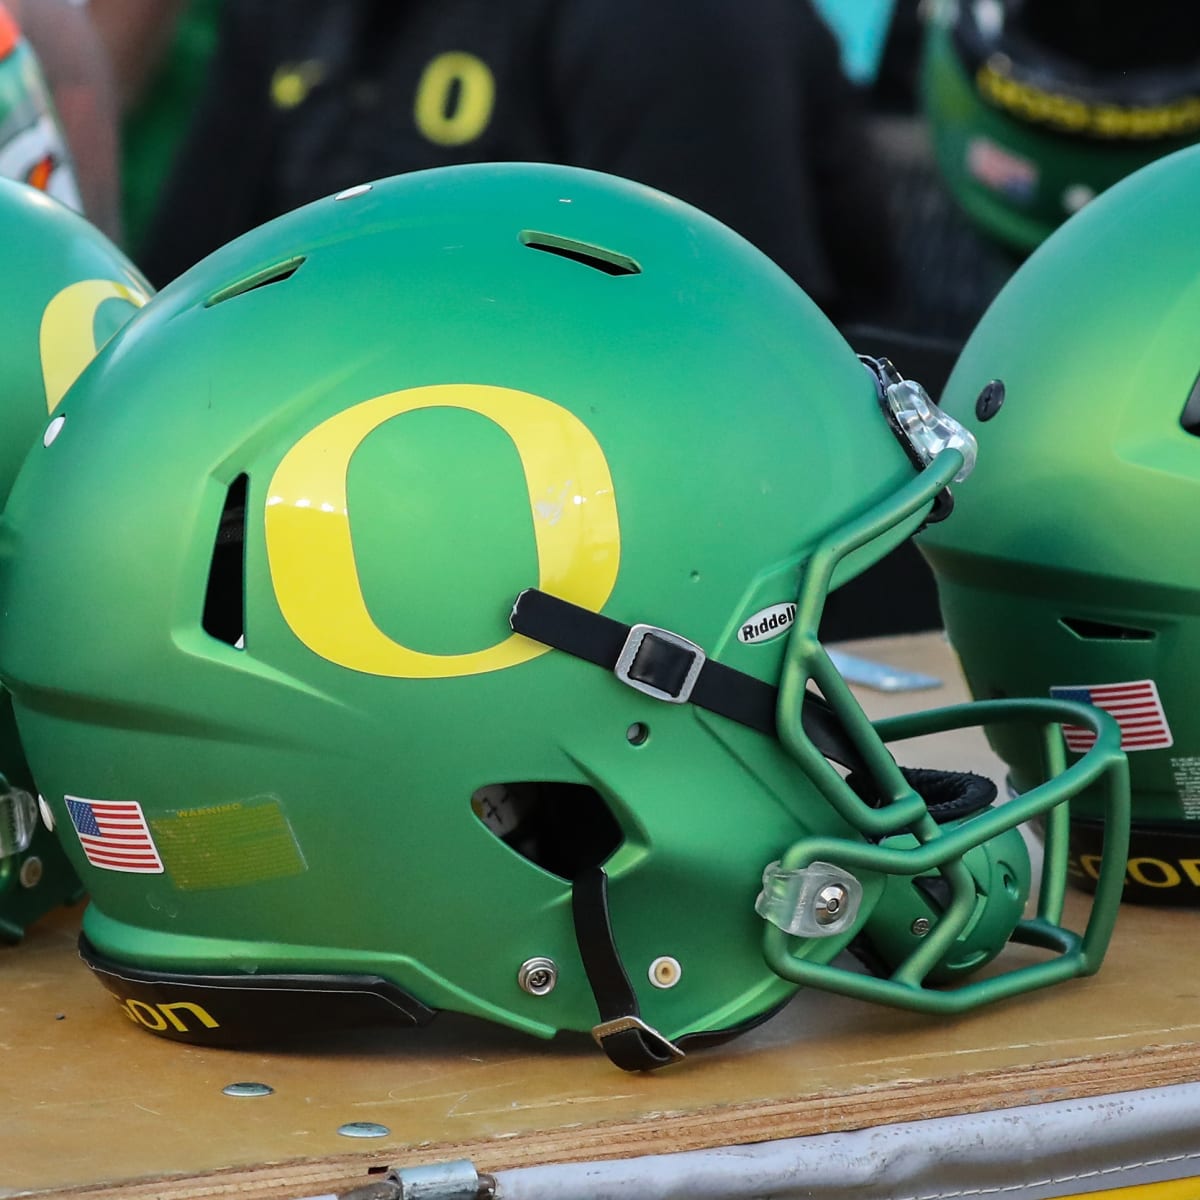 Oregon has taken breast cancer awareness to a brand new level with these  awesome uniforms